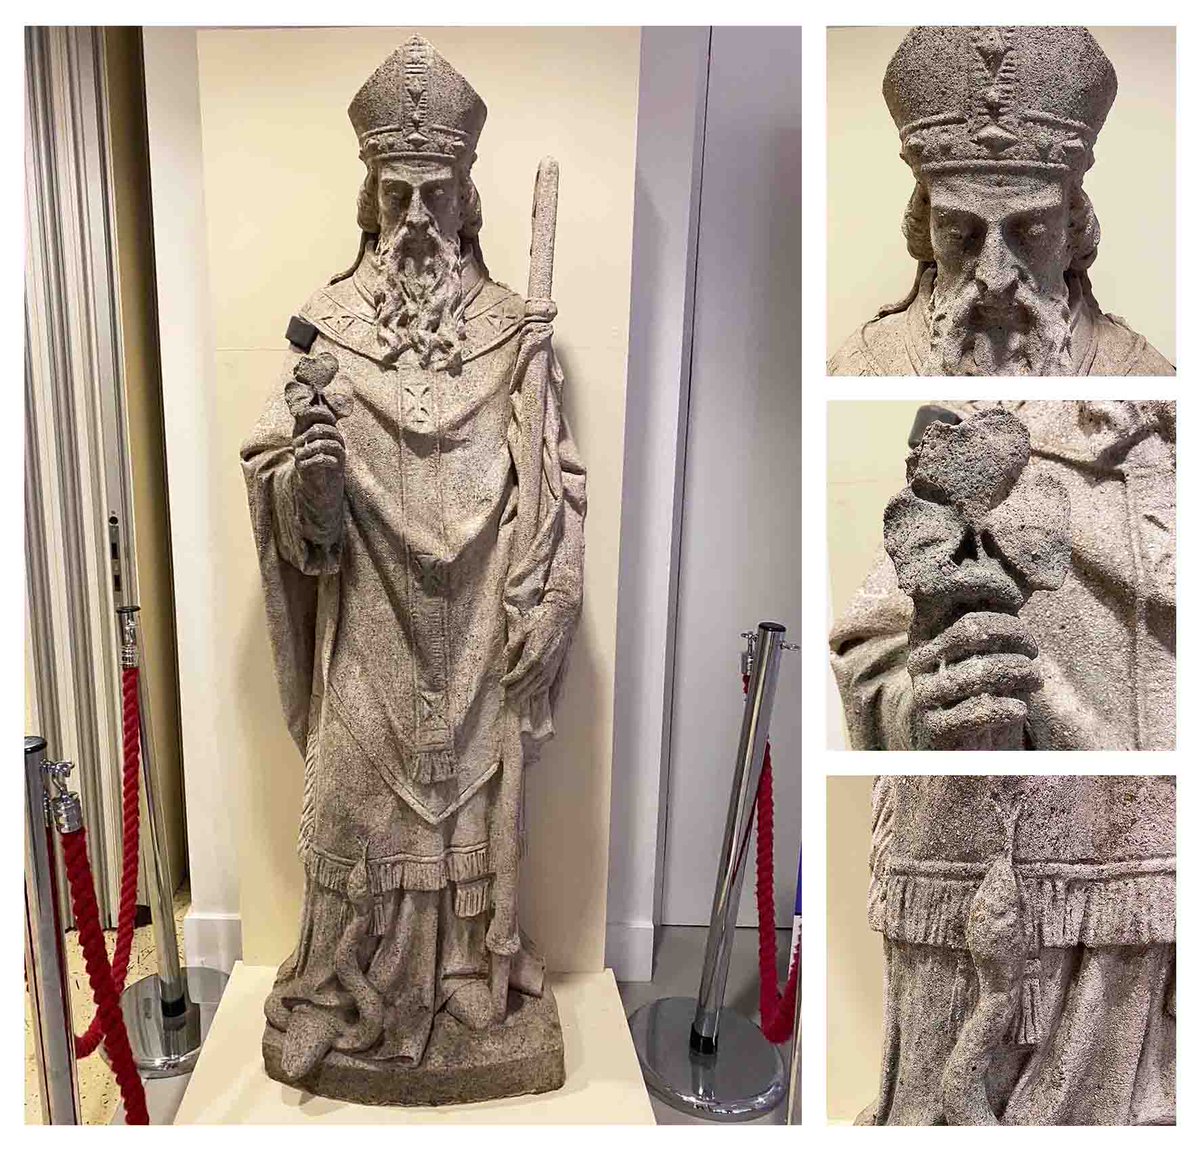 This statue of St Patrick was taken from St Illtyd's Catholic Boy's Grammar School in Splott, when the building was demolished in 2016. With some care from @CUConservation it is now on display in our City Lab gallery. #StPatricksDay